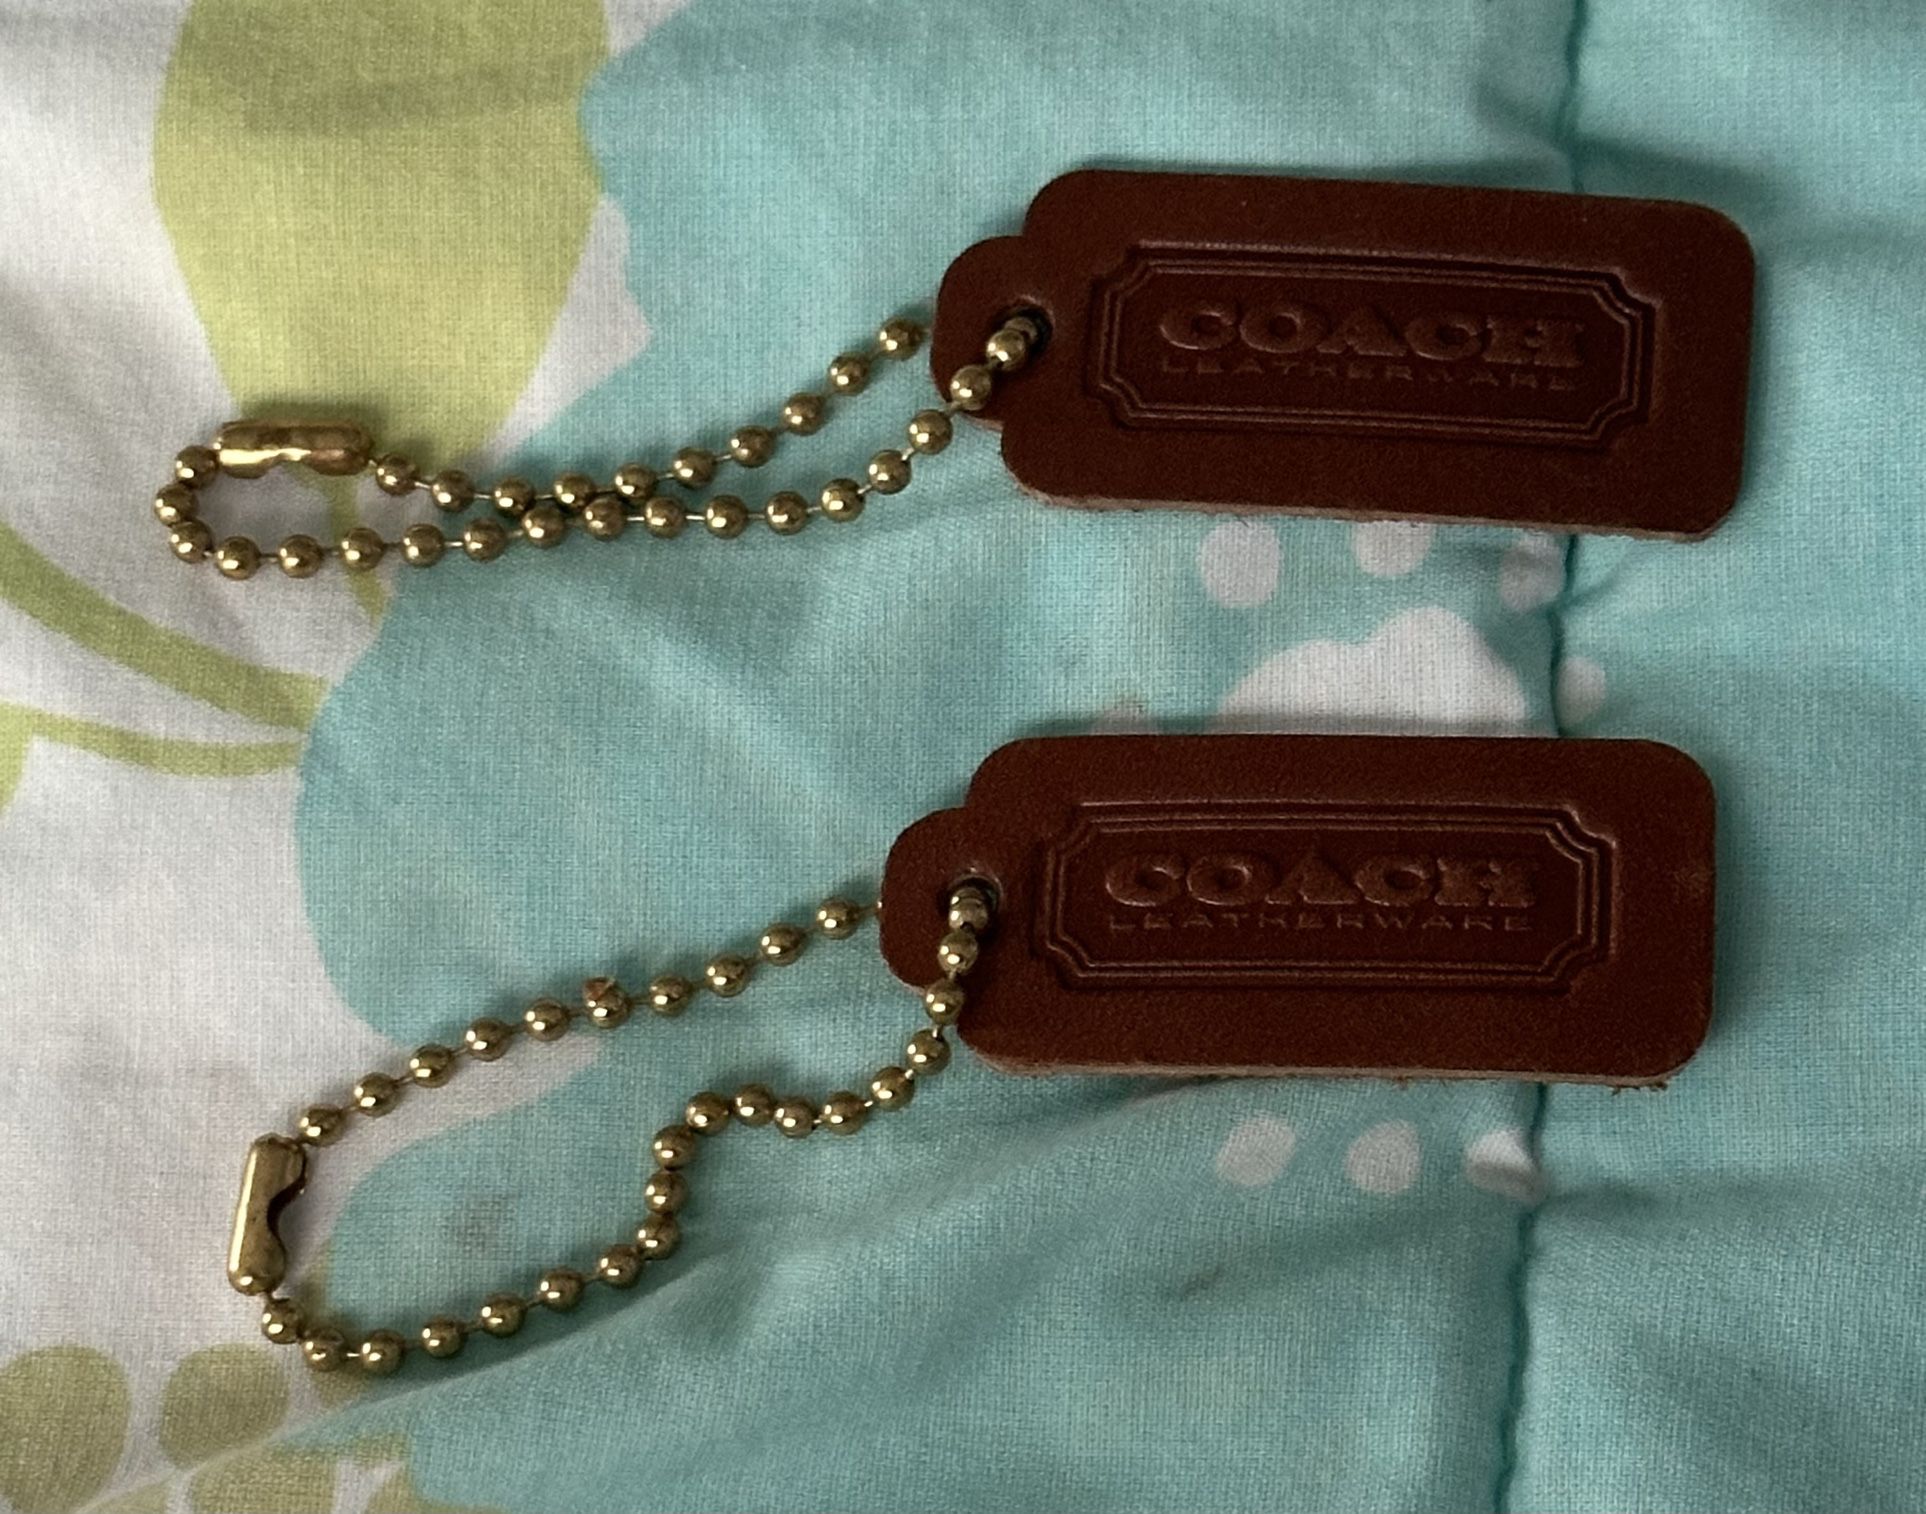 Vintage COACH Leather Ware Tags